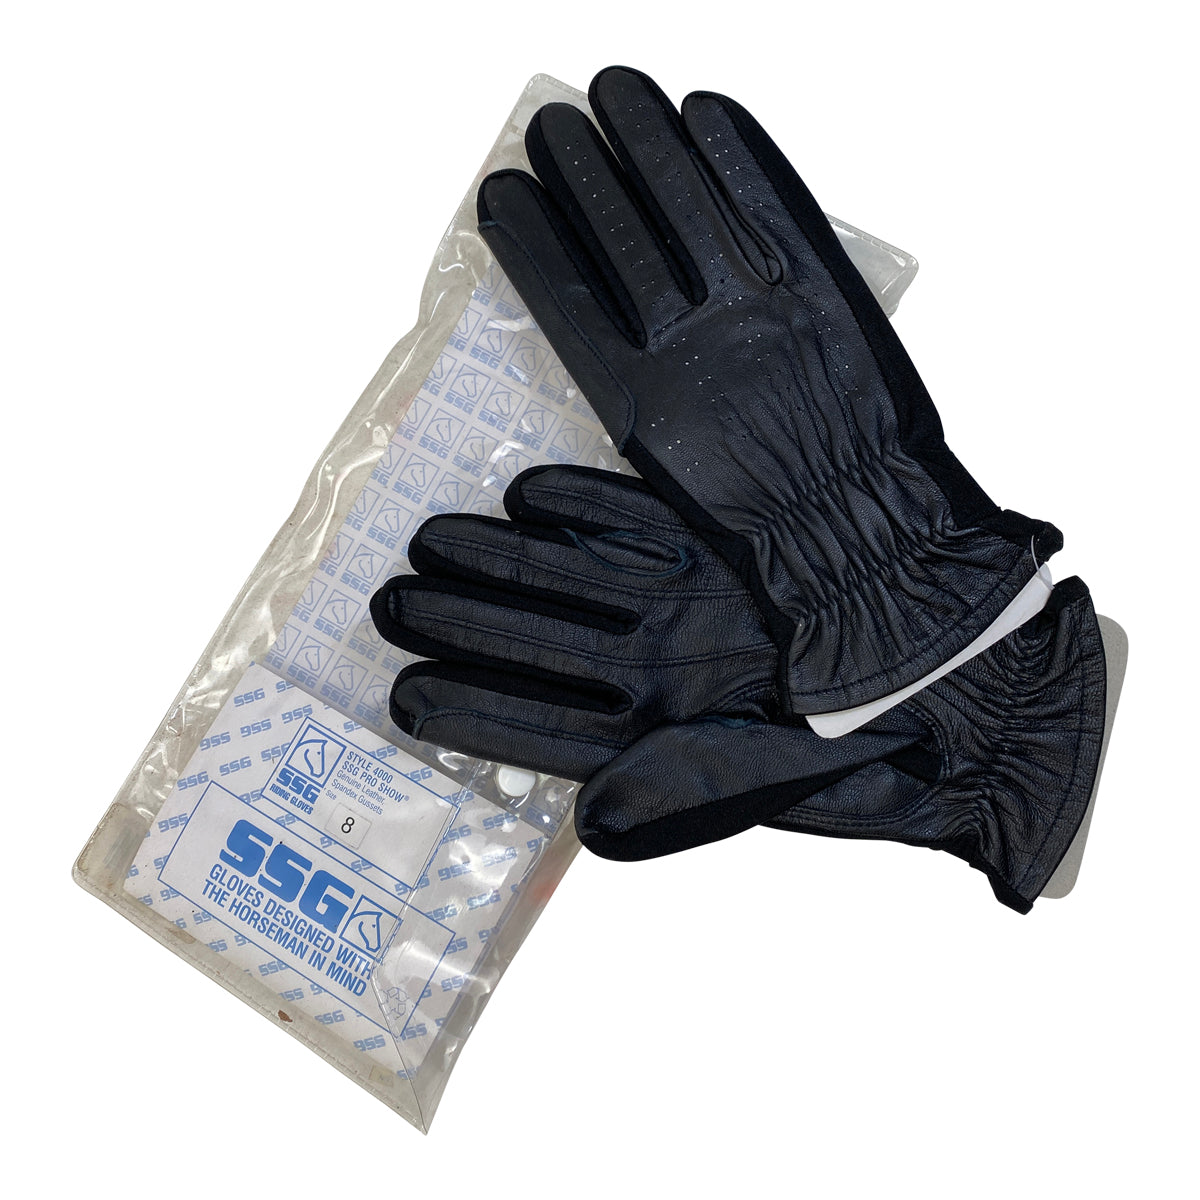 SSG Pro Show Riding Gloves in Black